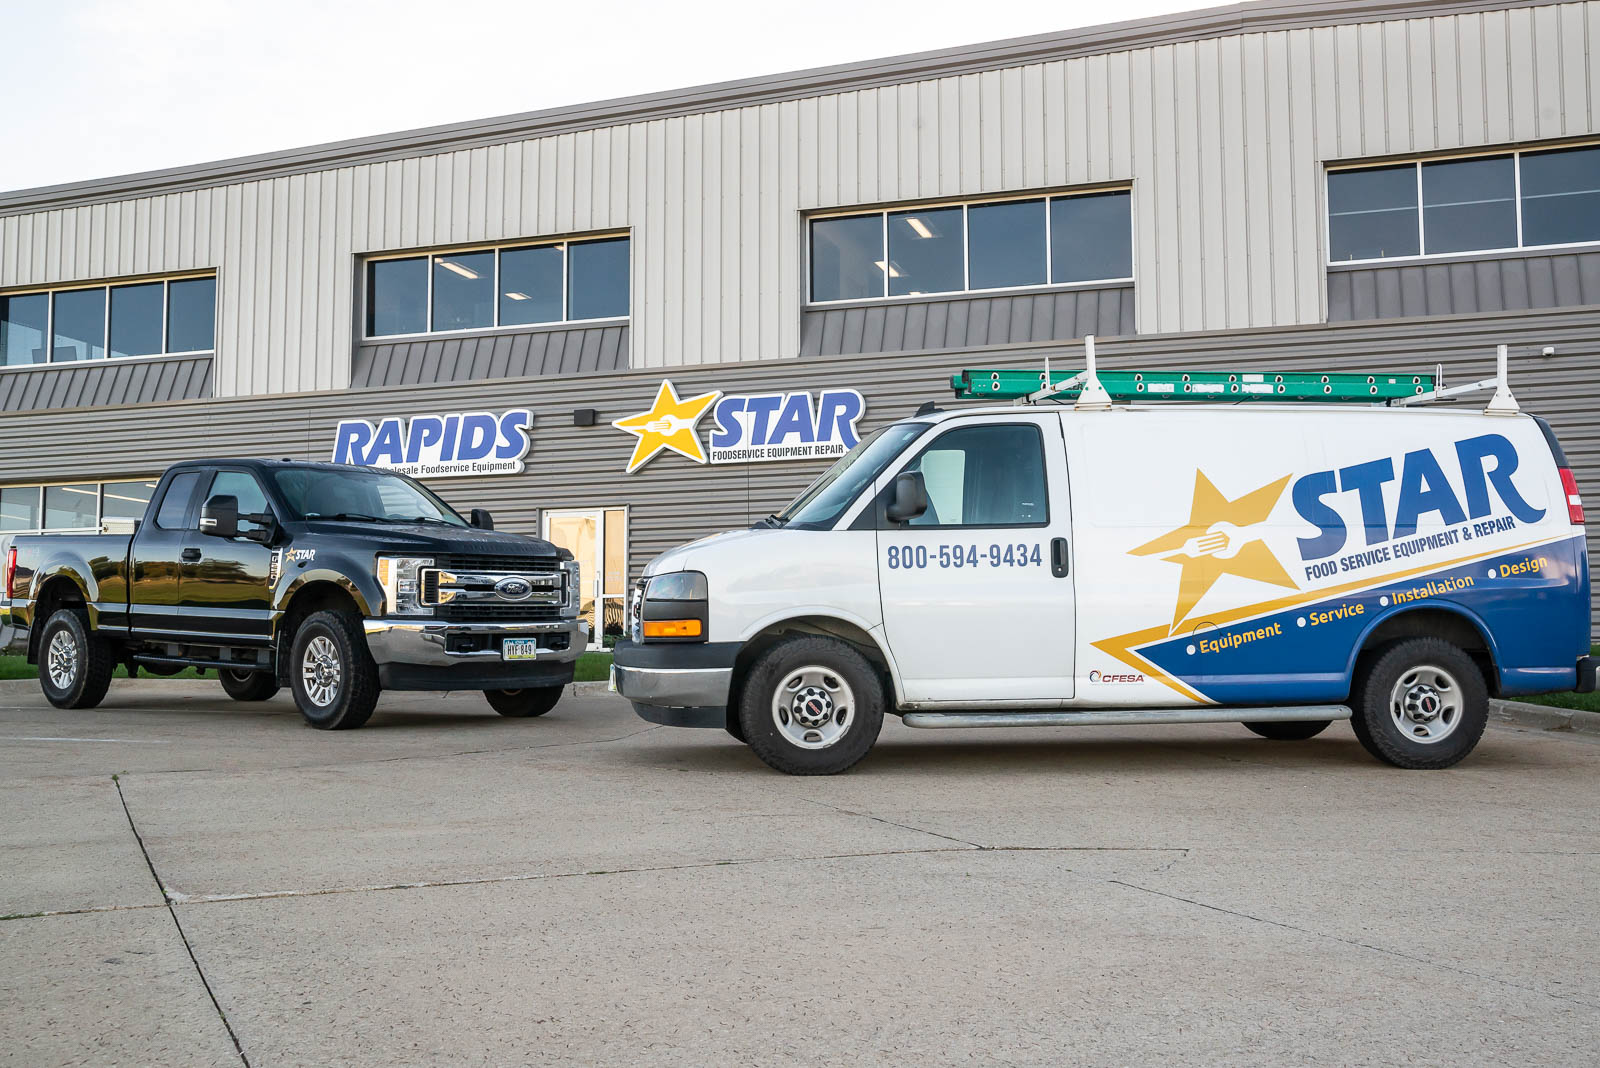 Star Foodservice Equipment & Repair and Rapids Contract